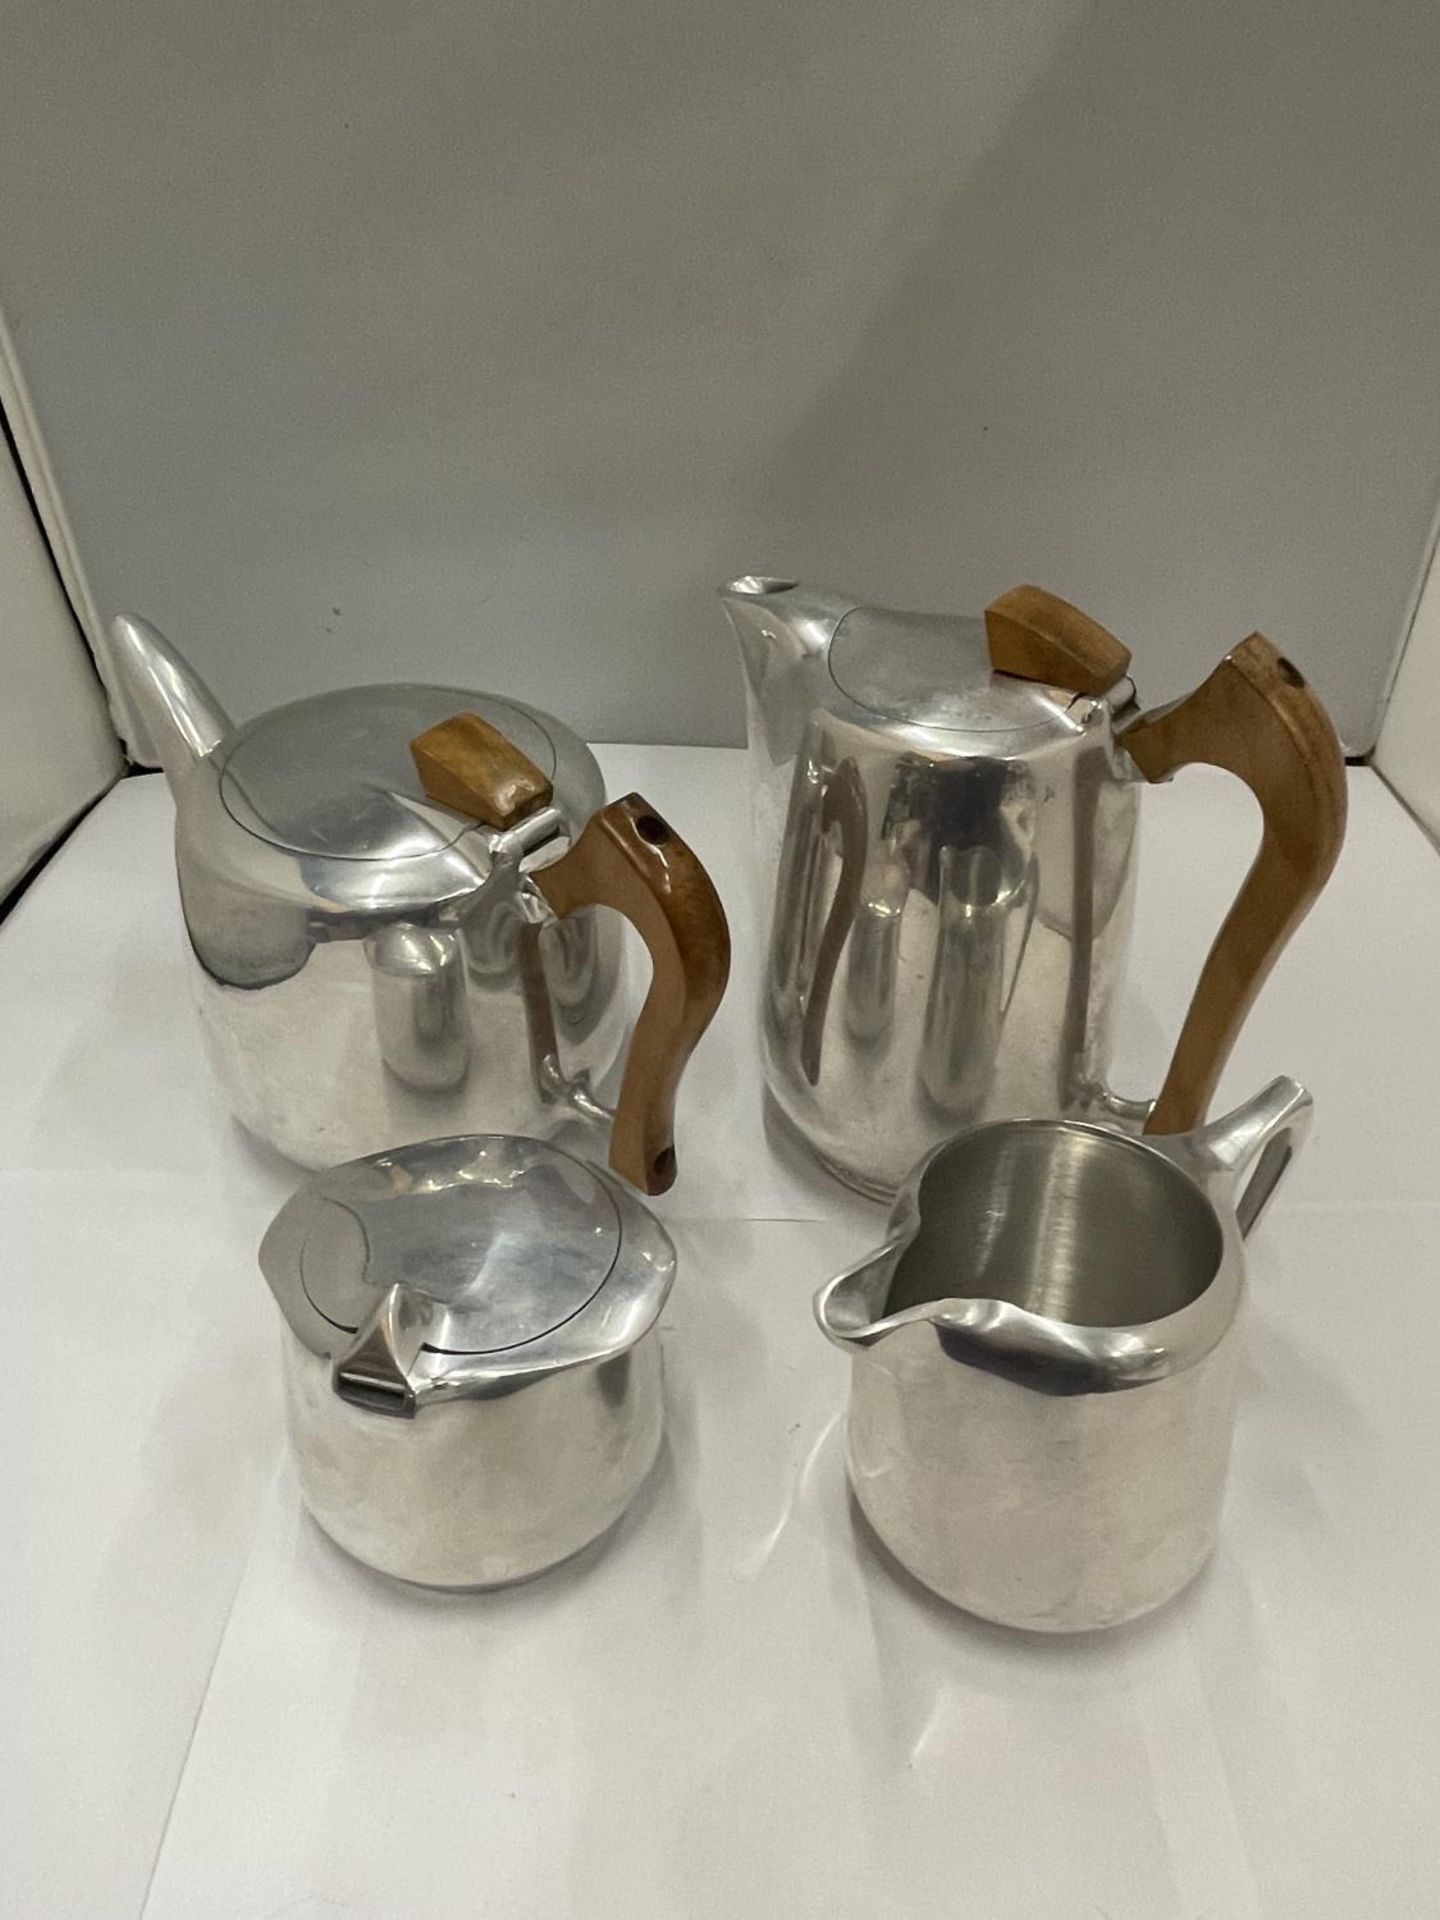 A PICQUOT WARE STAINLESS STEEL TEAPOT, COFFEE POT, SUGAR BOWL AND CREAM JUG